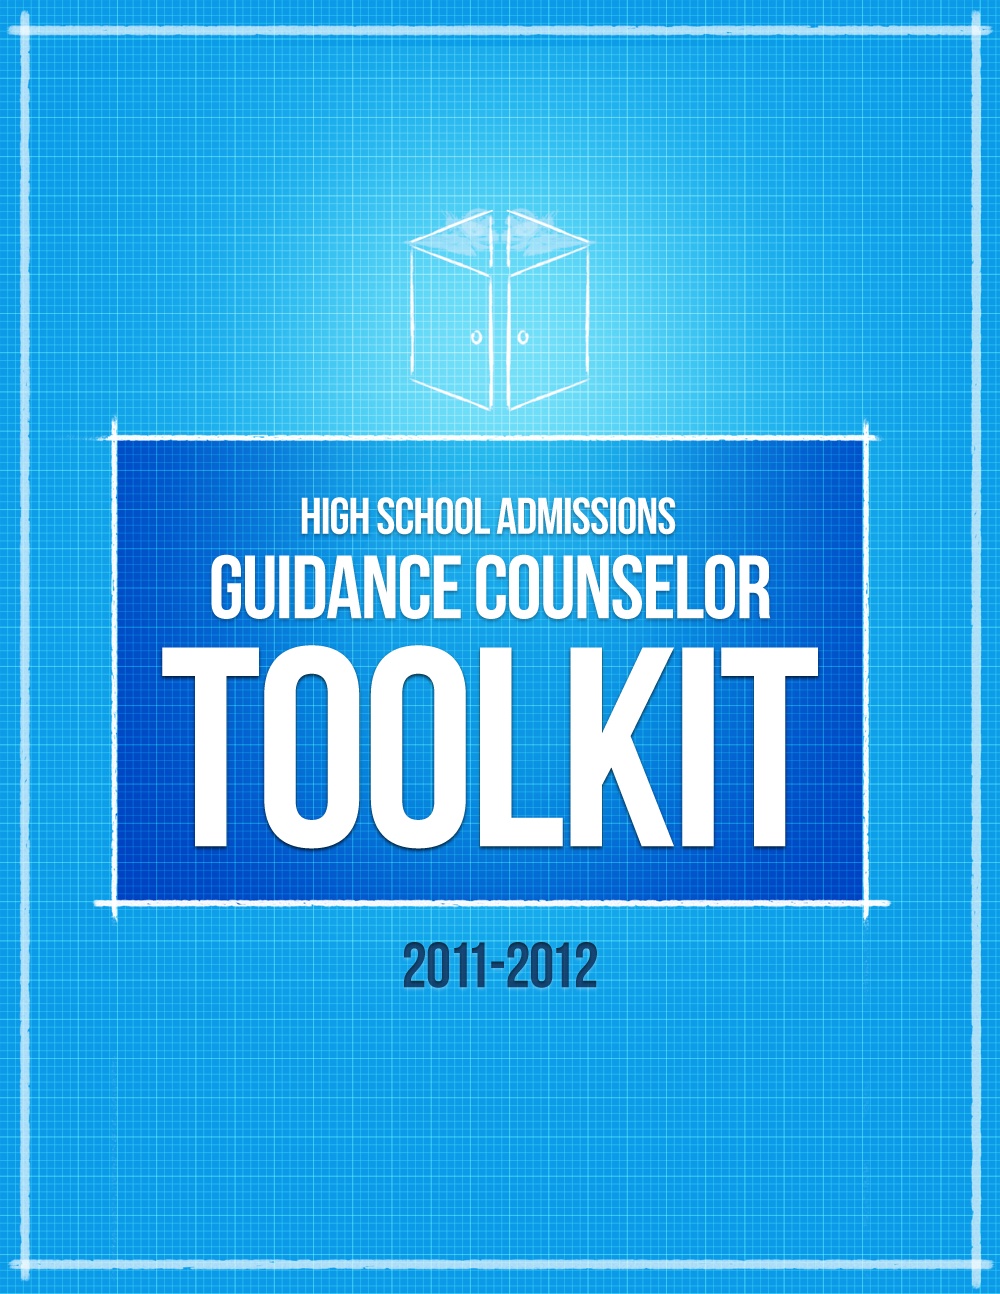 Guidance Counselor Toolkit - 1